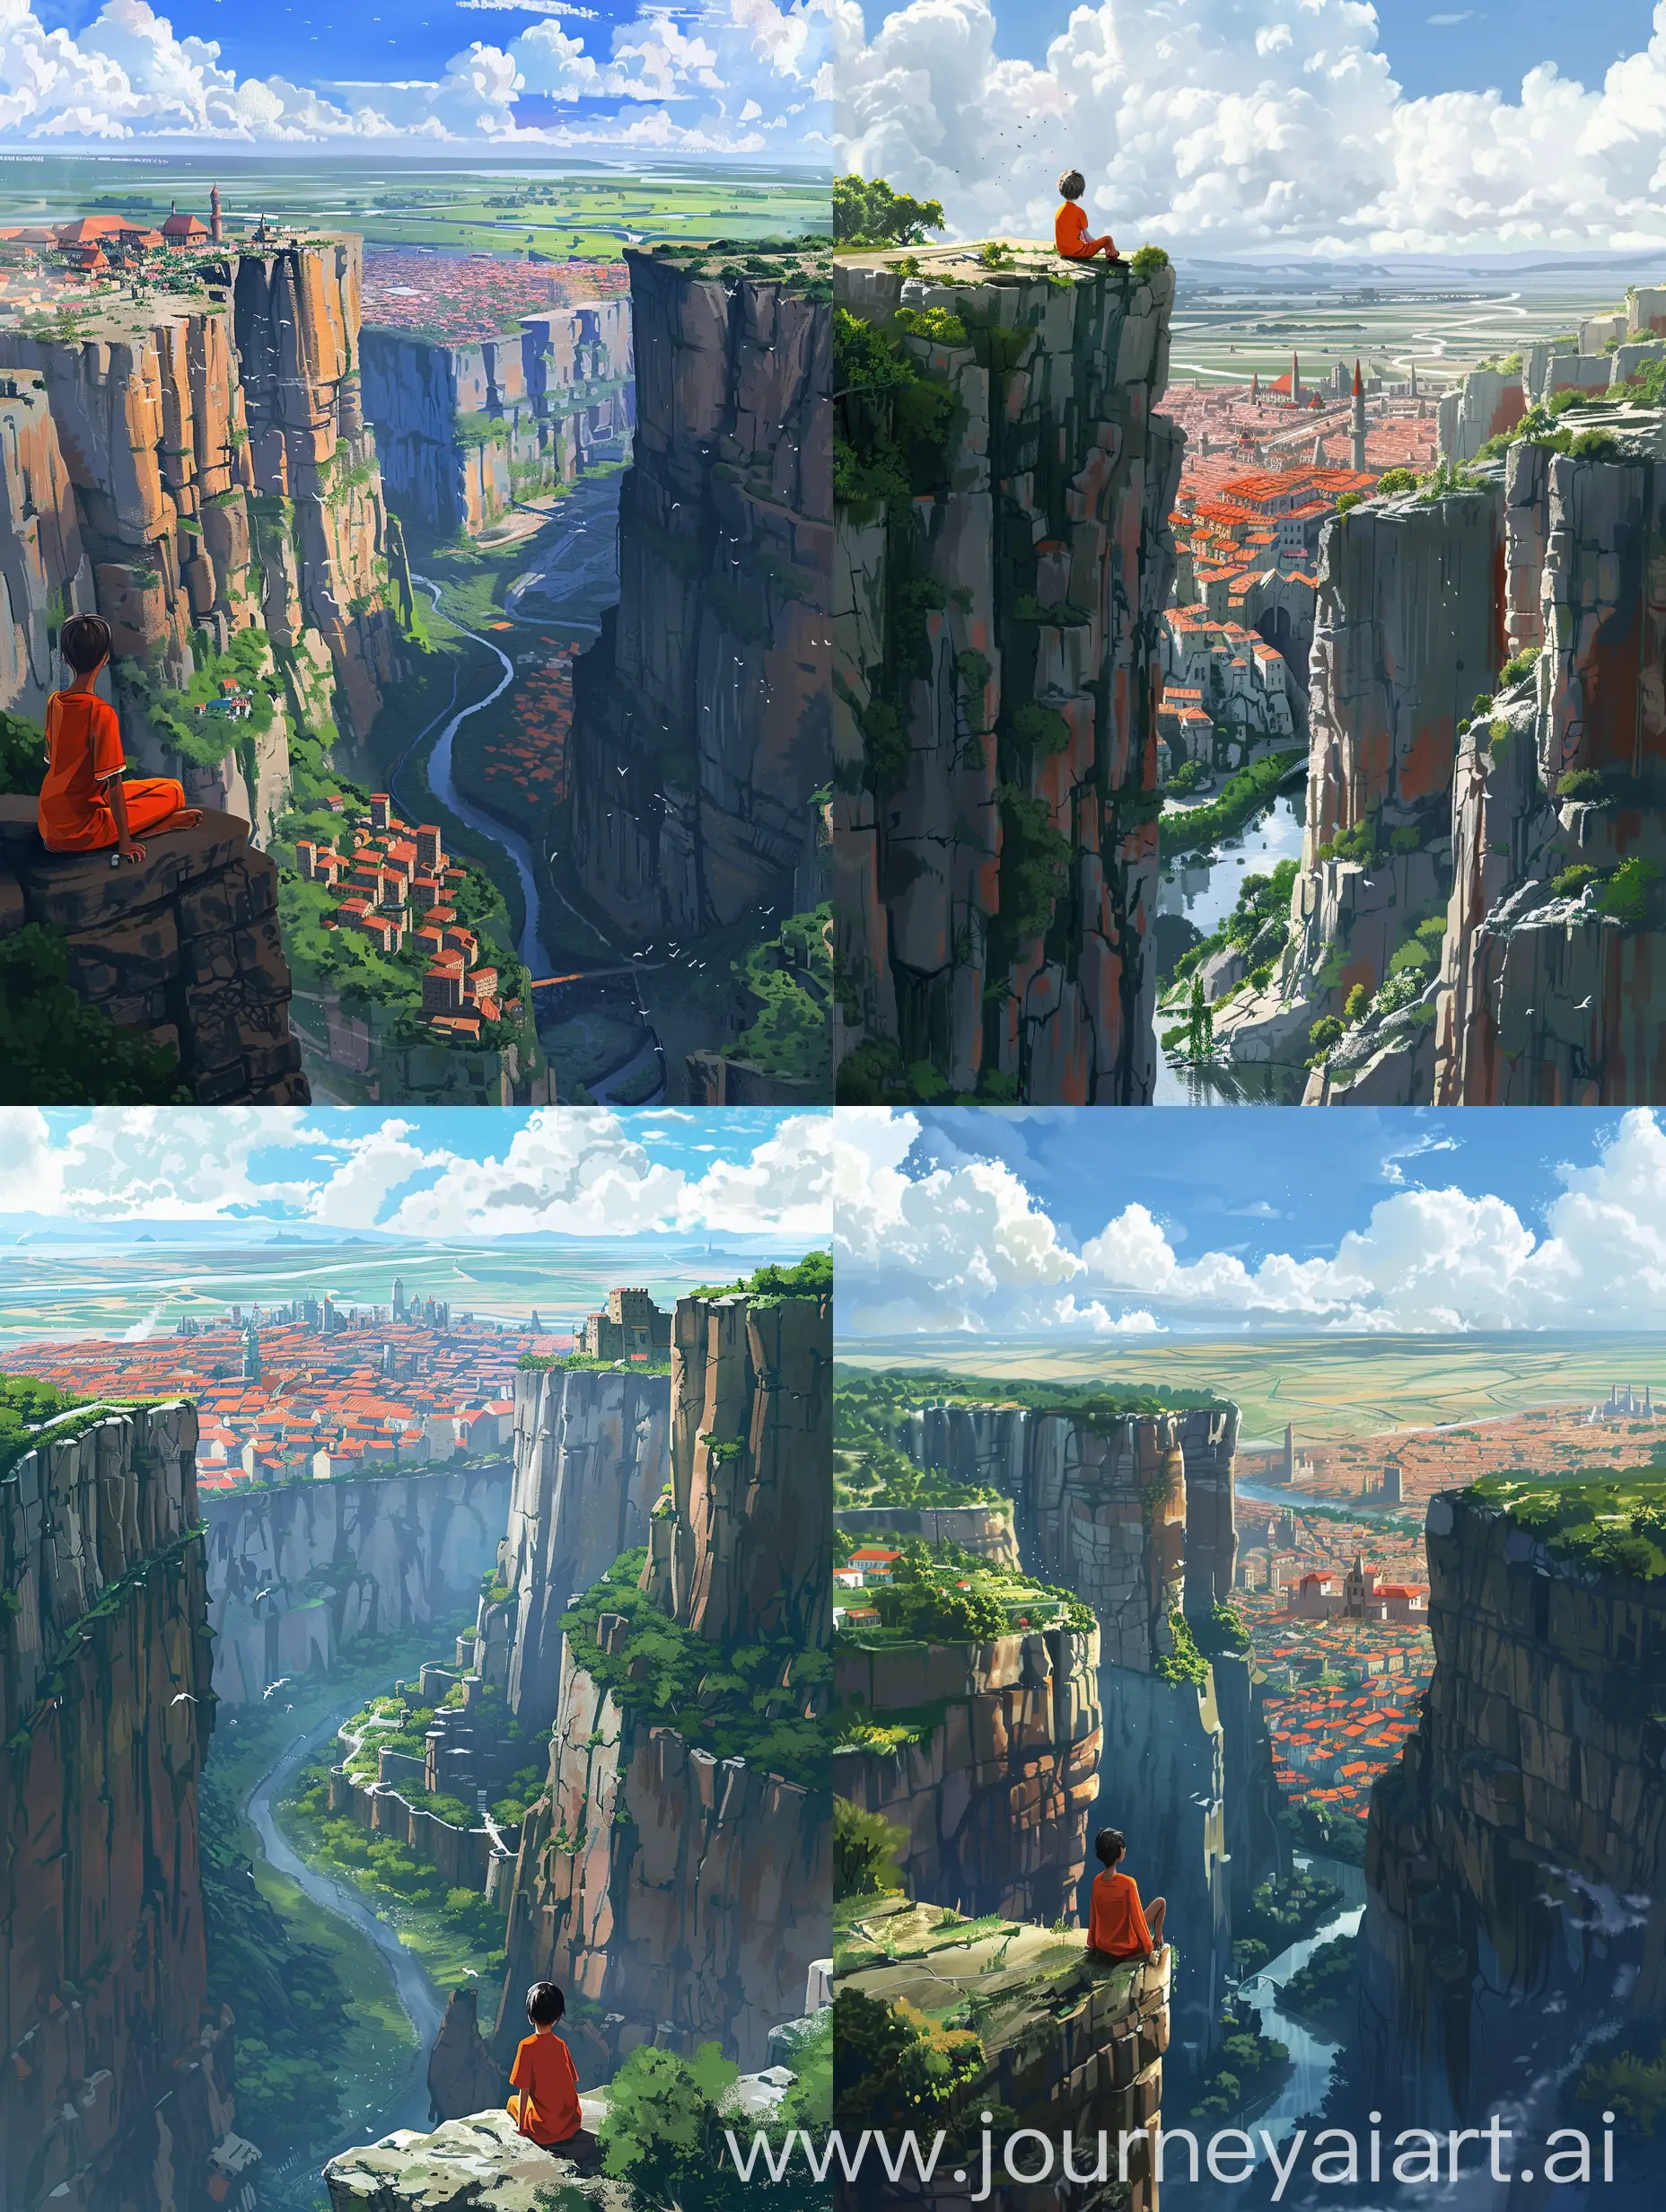 A digital painting of a boy sitting on the edge of a cliff. - he is wearing orange clothing and are facing away from the camera, which adds an element of anonymity and allows the viewer to imagine themselves in the scene. - The city below is situated between towering cliffs and is surrounded by lush greenery. - A river flows through the city, with buildings featuring red roofs along its banks, creating a striking contrast against the green landscape. - The city extends into flat lands in the distance, under a sky dotted with fluffy white clouds